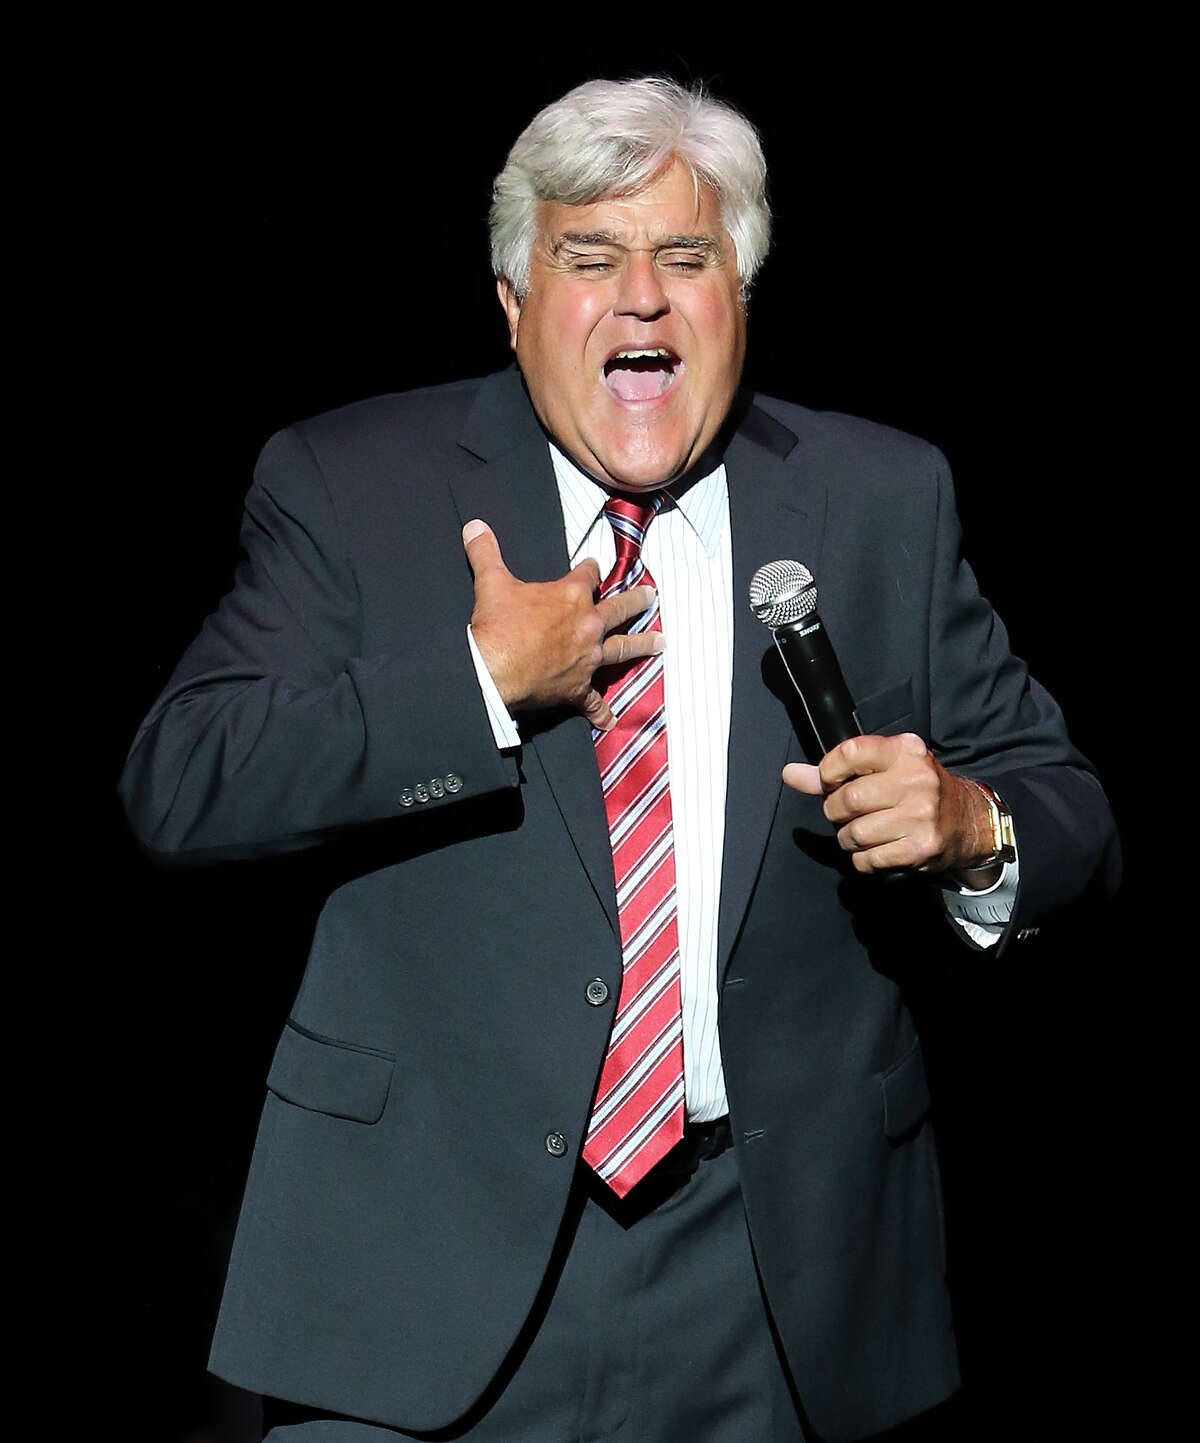 Jay Leno plays at the Majestic Theater on June 13, 2014.